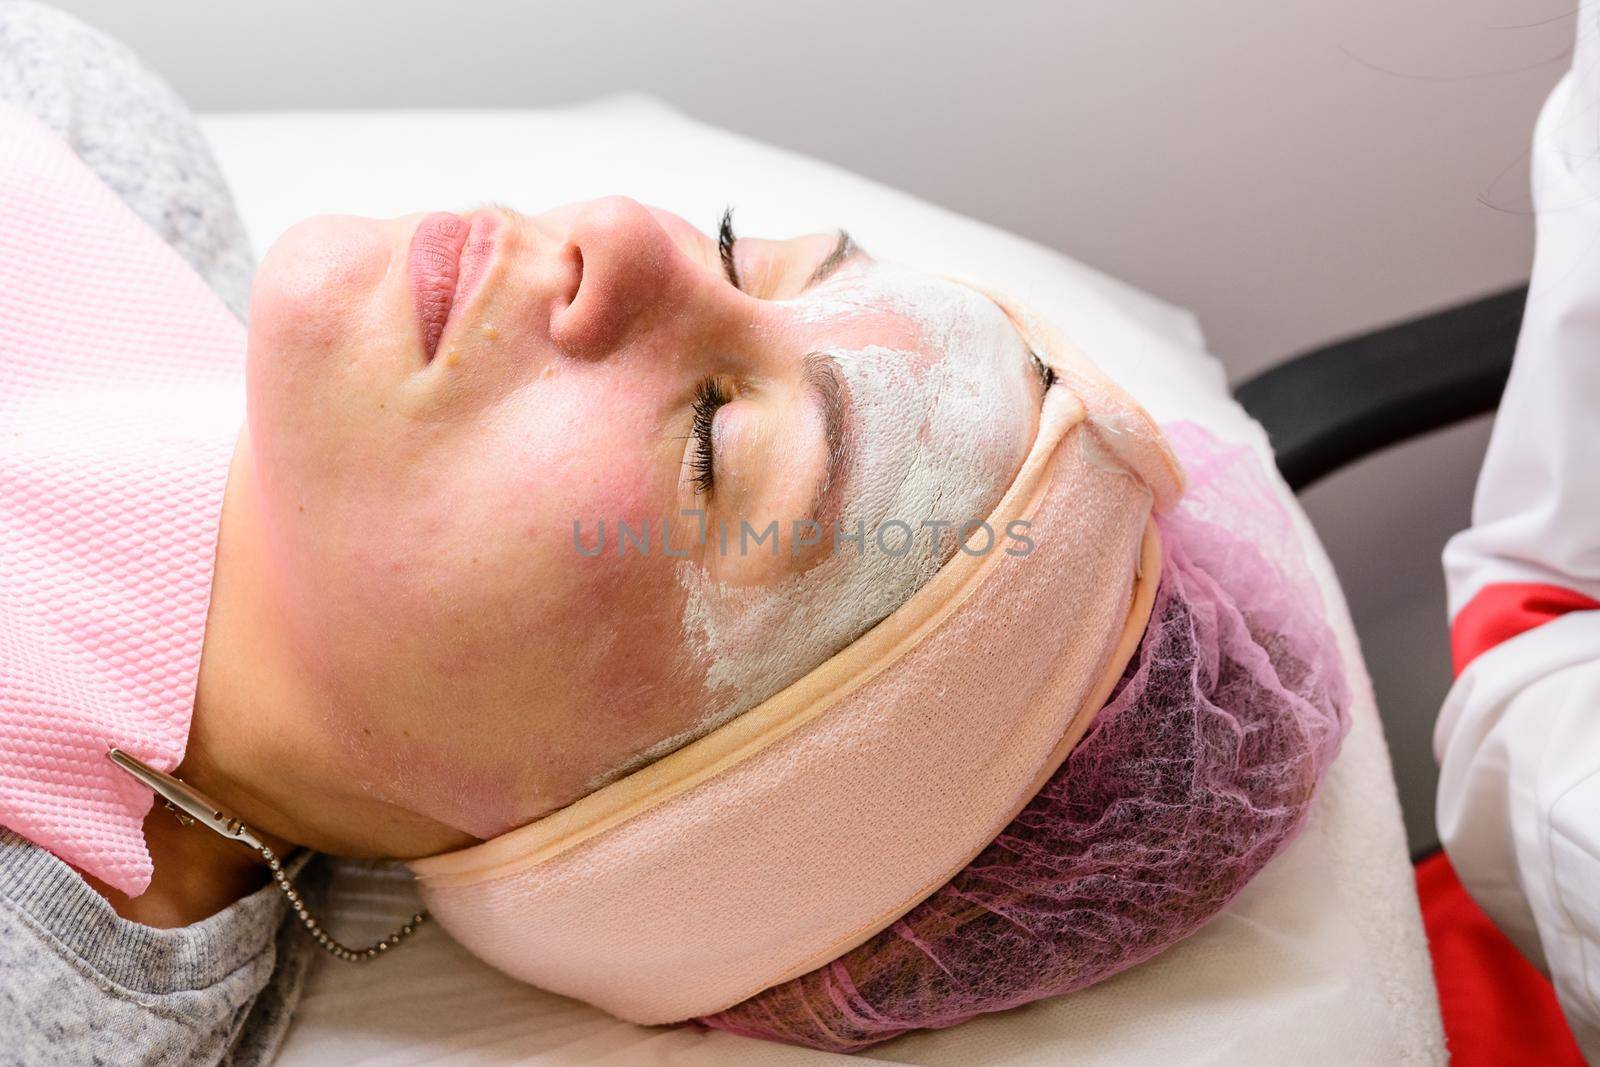 Flushing cryo-mask, skin rejuvenation and restoration procedure, cleansing and narrowing pores. new